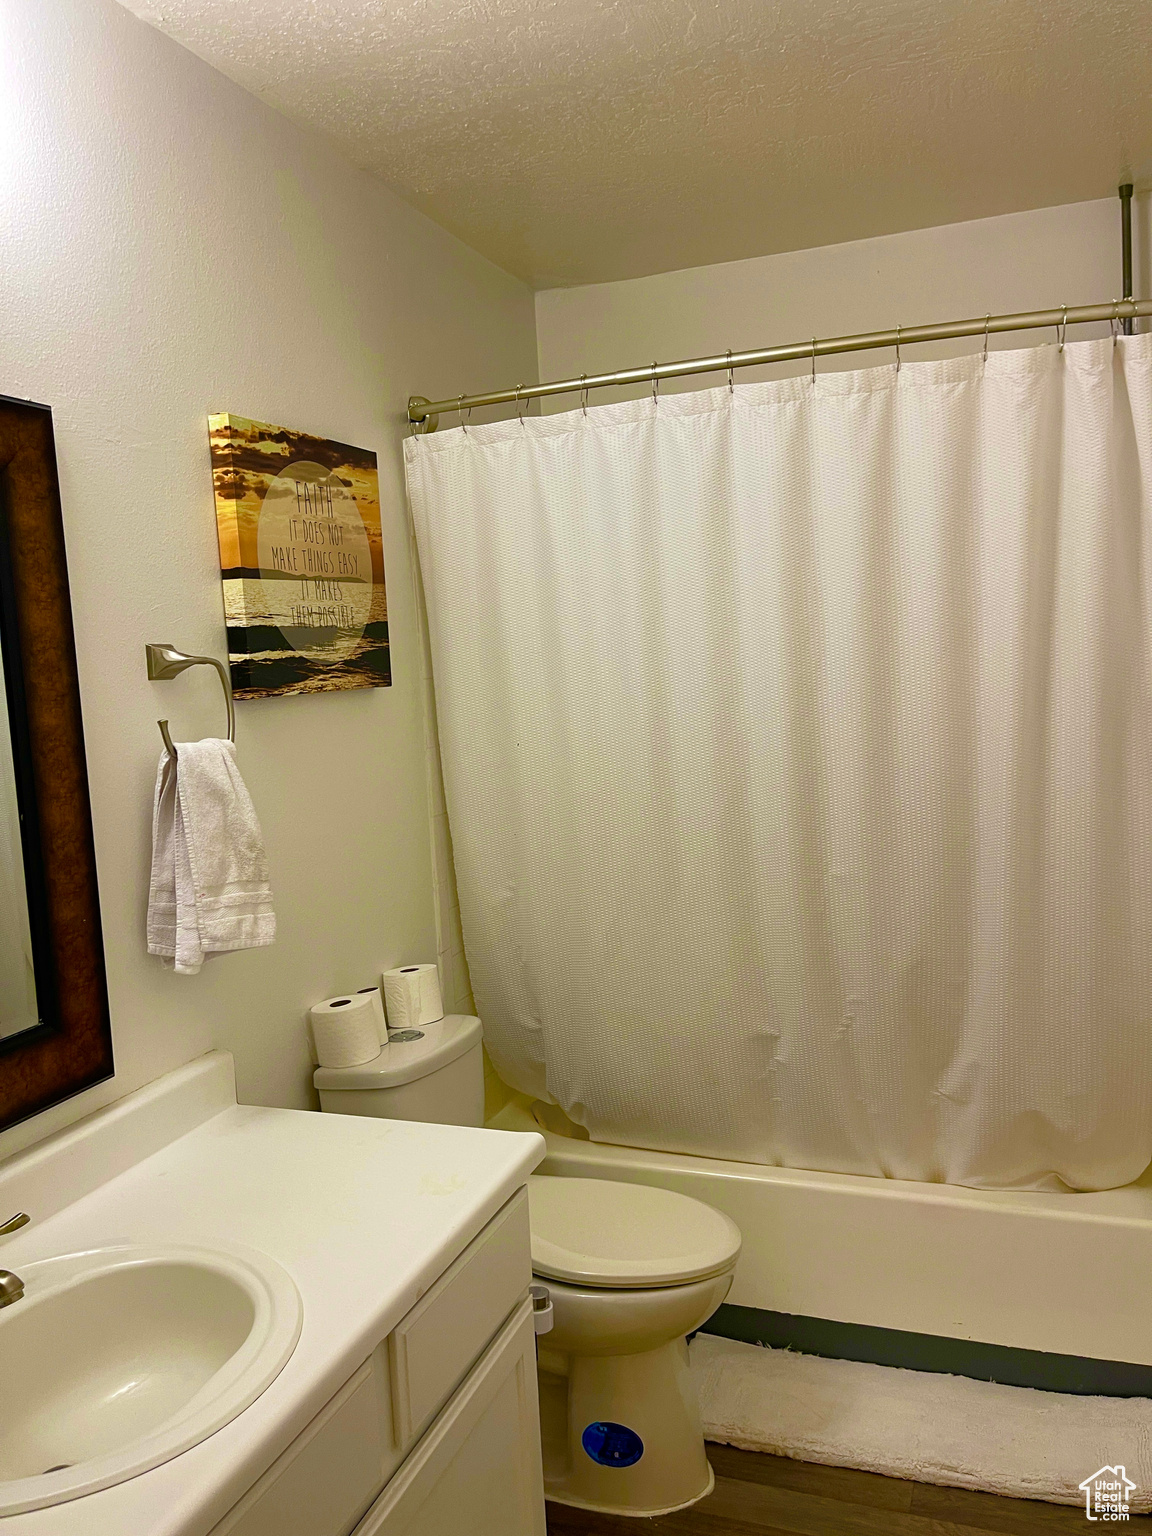 Full bathroom with wood-type flooring, shower / bath combo with shower curtain, vanity, toilet, and a textured ceiling